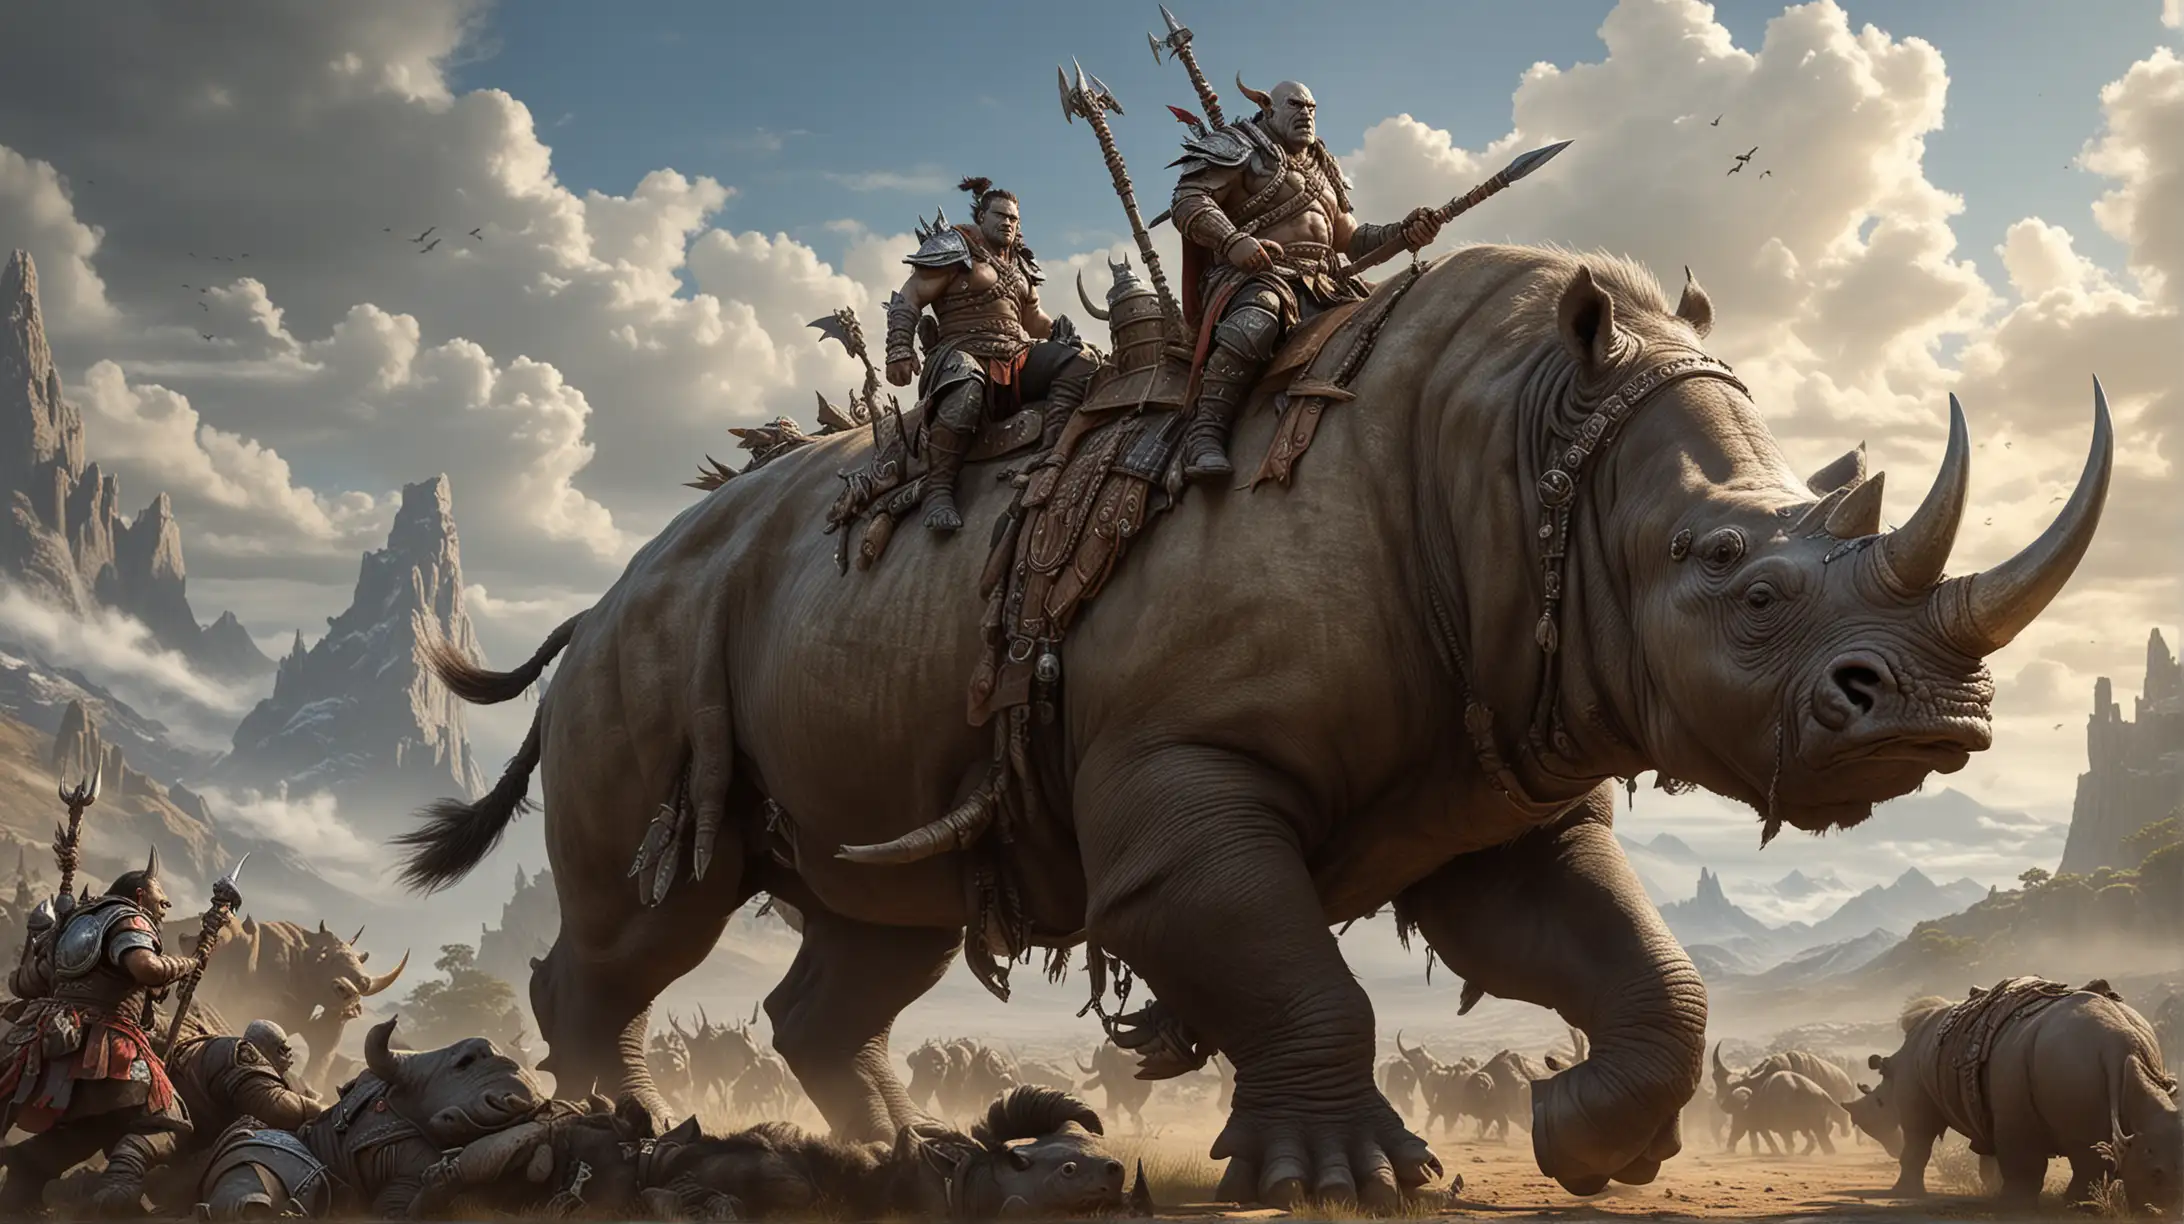 Orc war leader atop of very large boar with some rhino features as a mount, high fantasy, large tusks